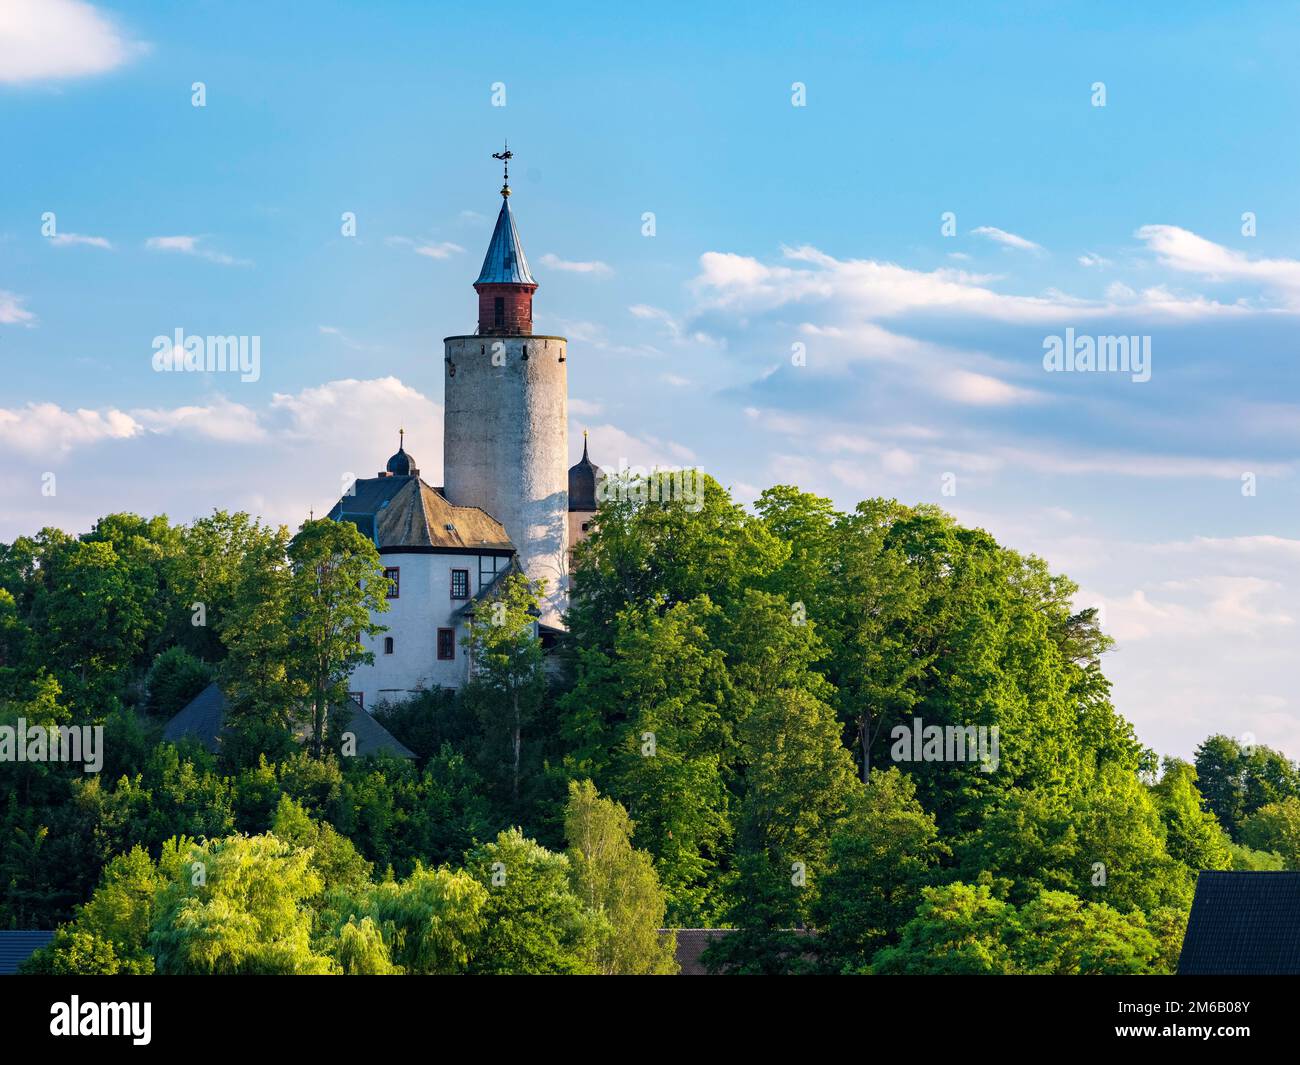 Posterstein Castle in the evening light, Posterstein, Altenburger Land, Thuringia, Germany Stock Photo